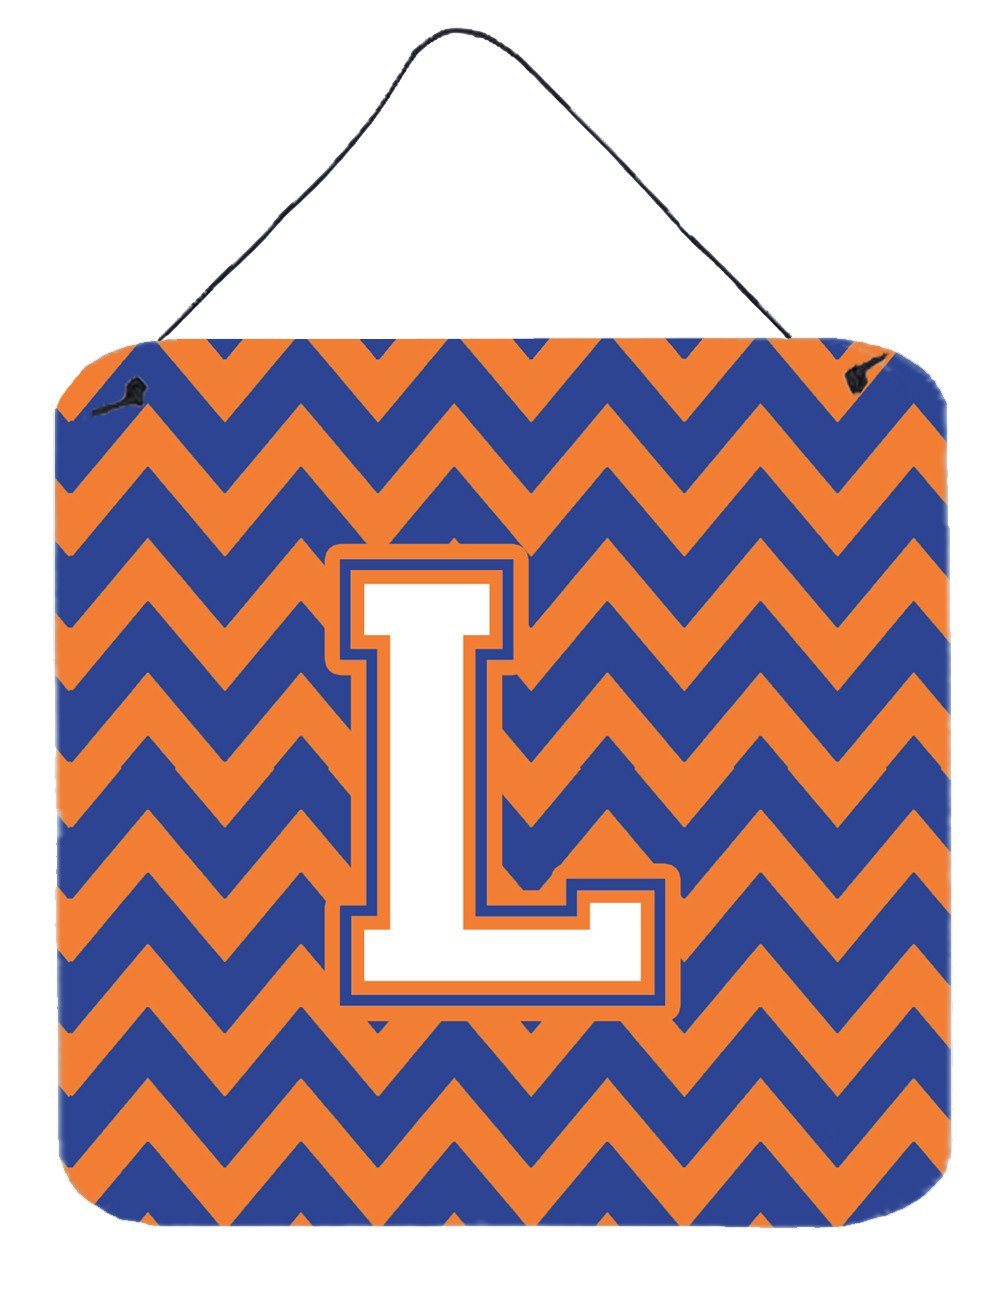 Letter L Chevron Blue and Orange #3 Wall or Door Hanging Prints CJ1060-LDS66 by Caroline's Treasures